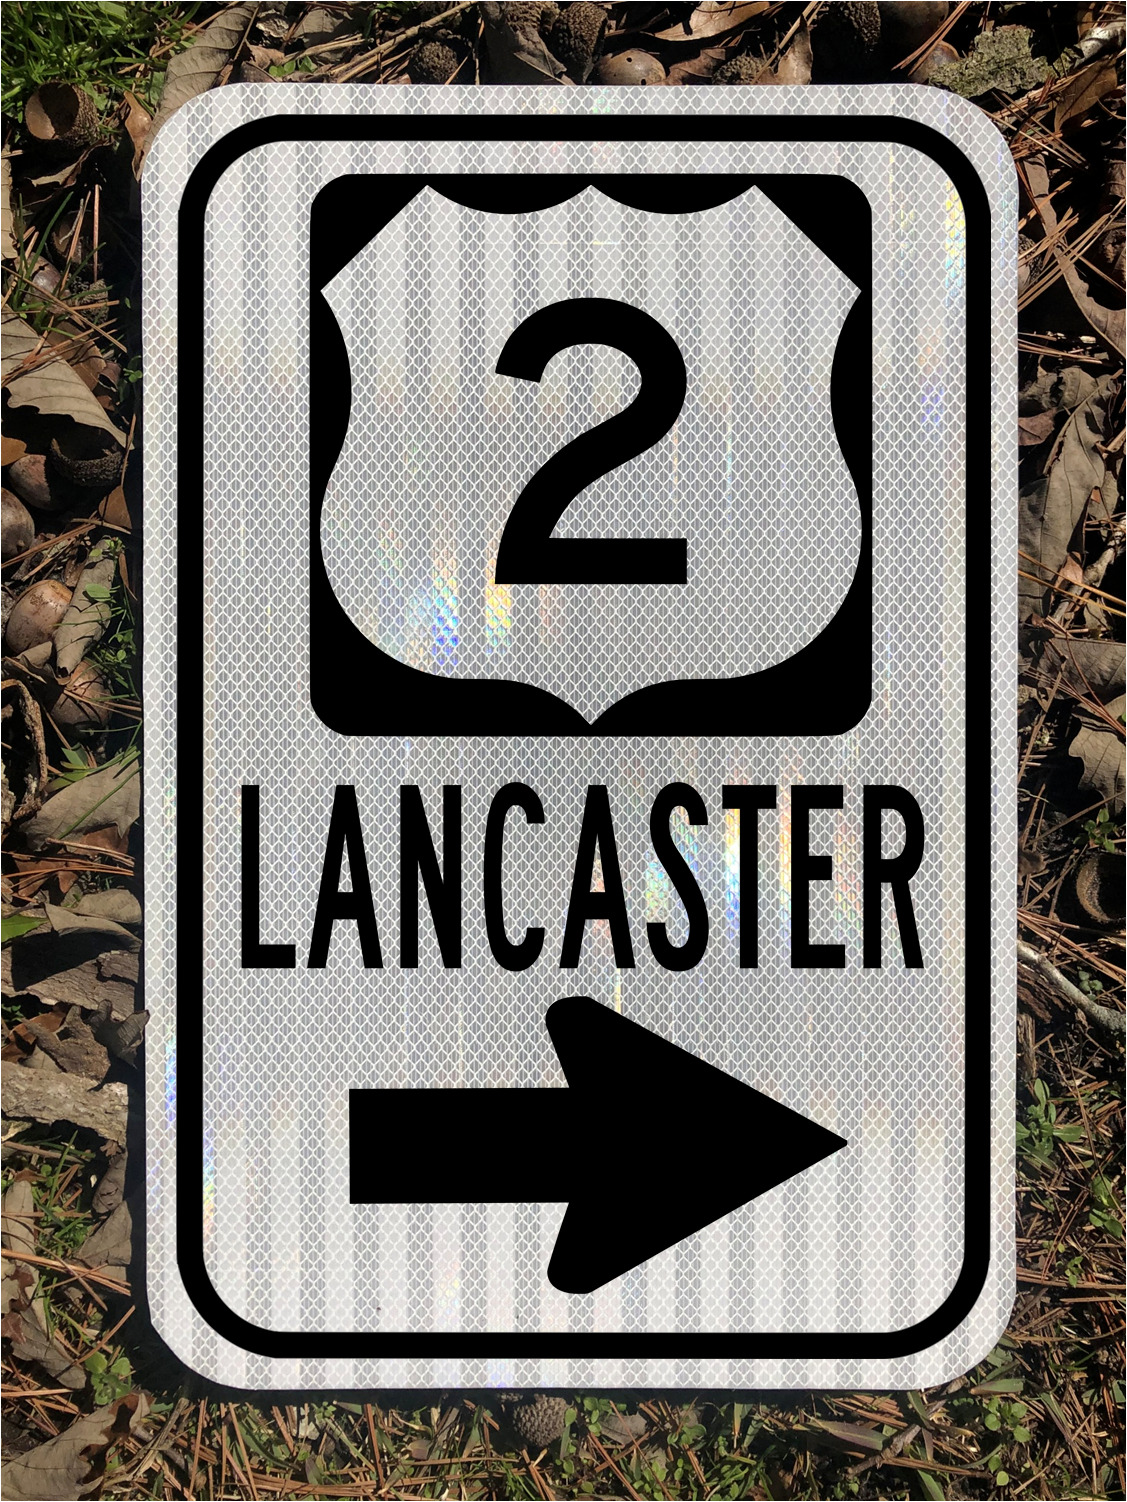 LANCASTER NEW HAMPSHIRE US Highway 2 road sign 12